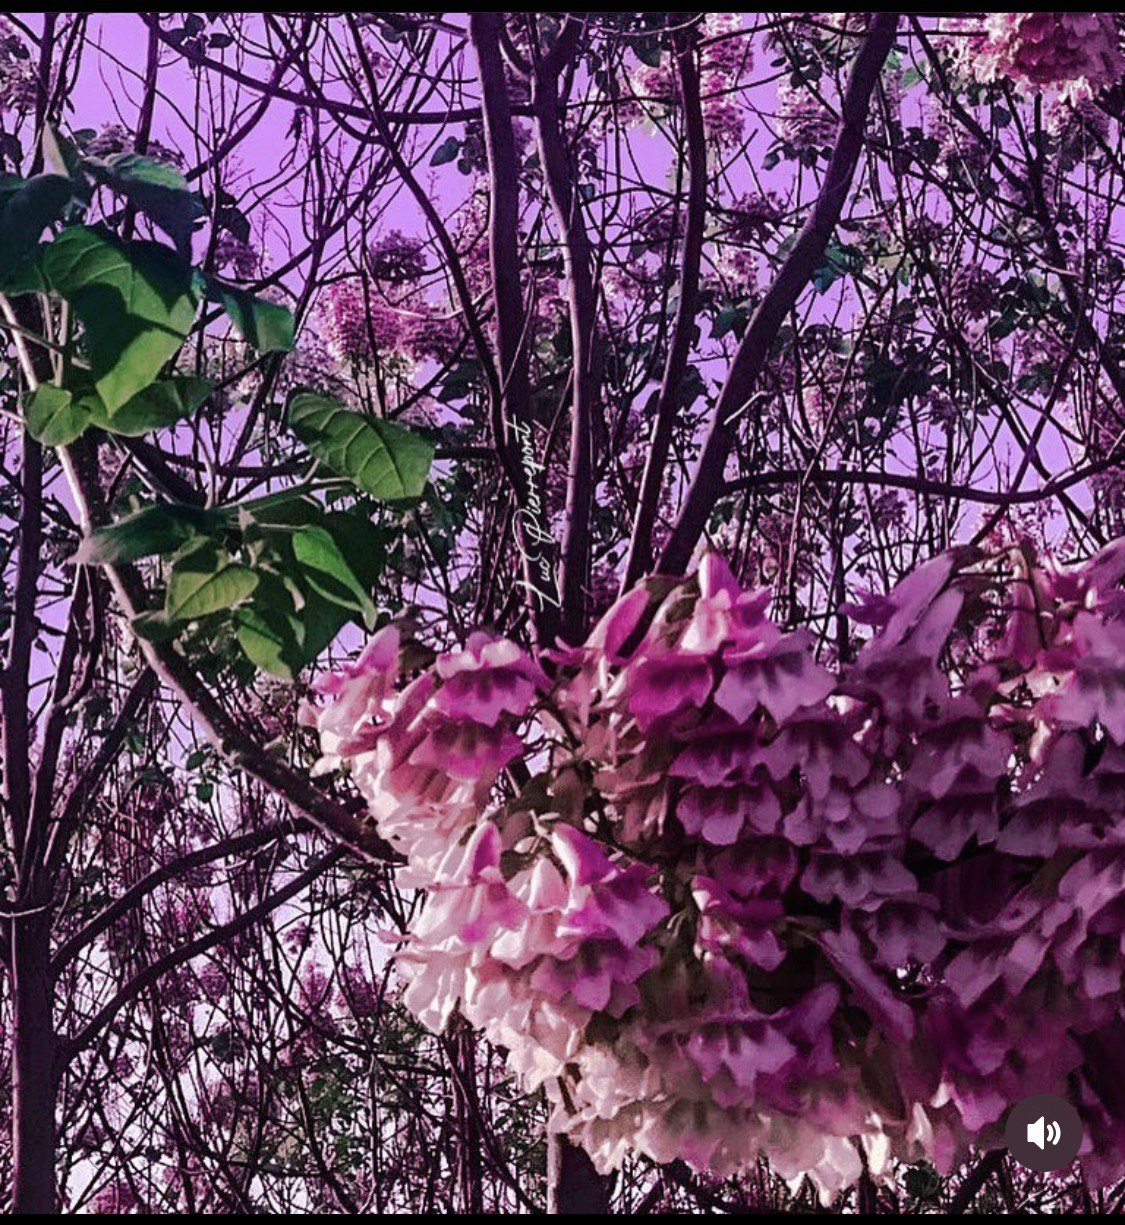 A photograph edited using Lightroom. Tone and colour was accentuated of a full blossomed tree making it appear as though the tree is full of candy.